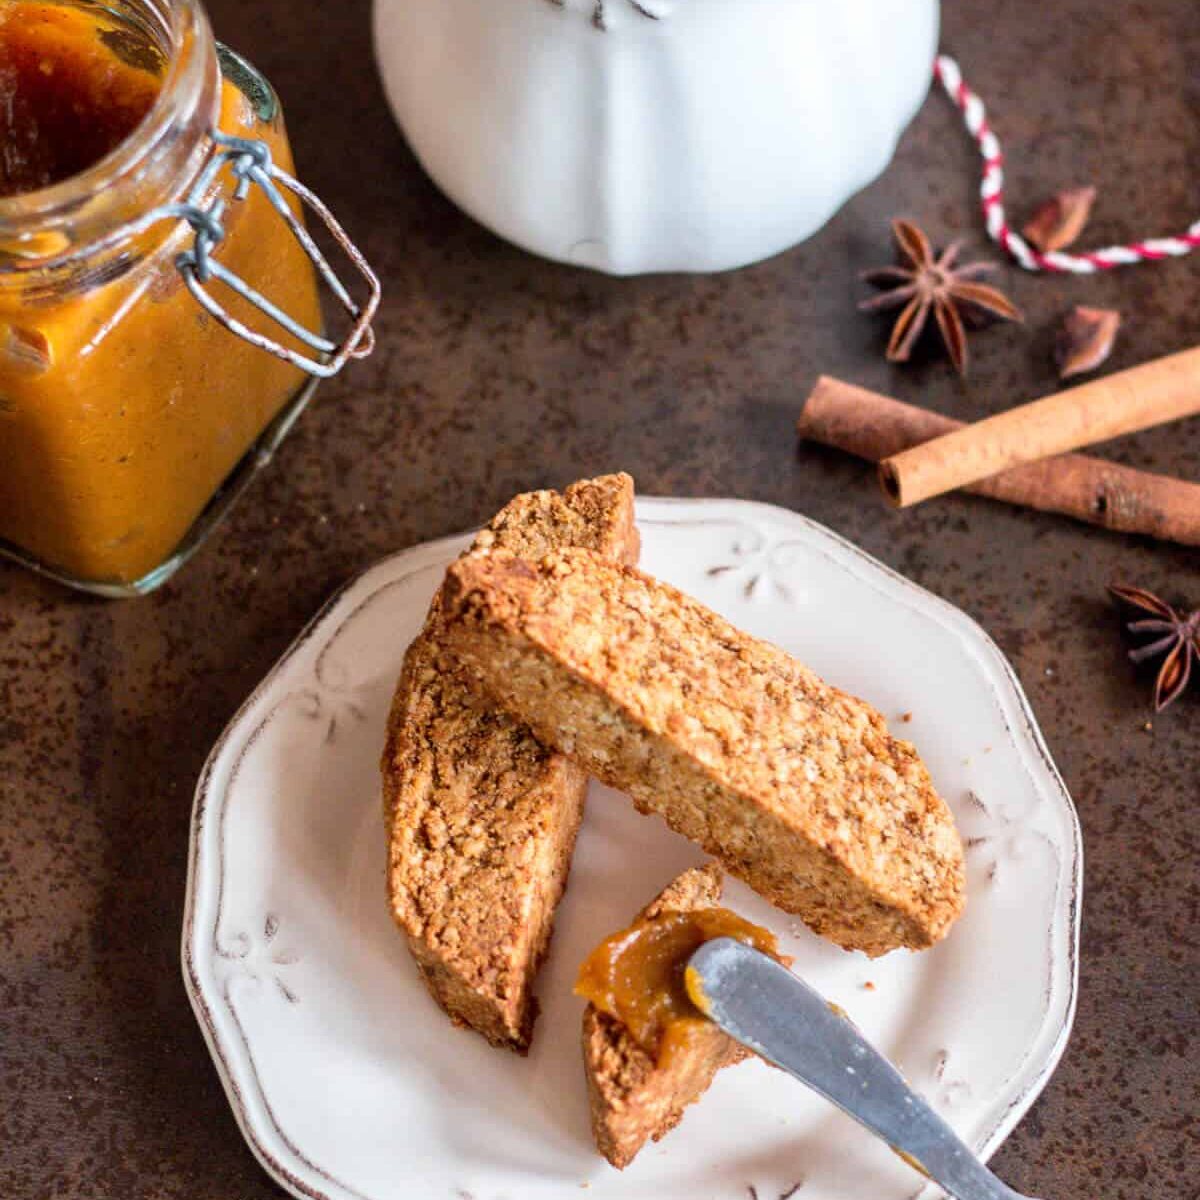 Top view of three pumpkin spice biscotti on a plate with a knife spreading spiced pumpkin butter over one piece. Beside the plate are an open jar of pumpkin butter, a white ceramic jug, and a couple pieces of cinnamon sticks and star anise seeds.